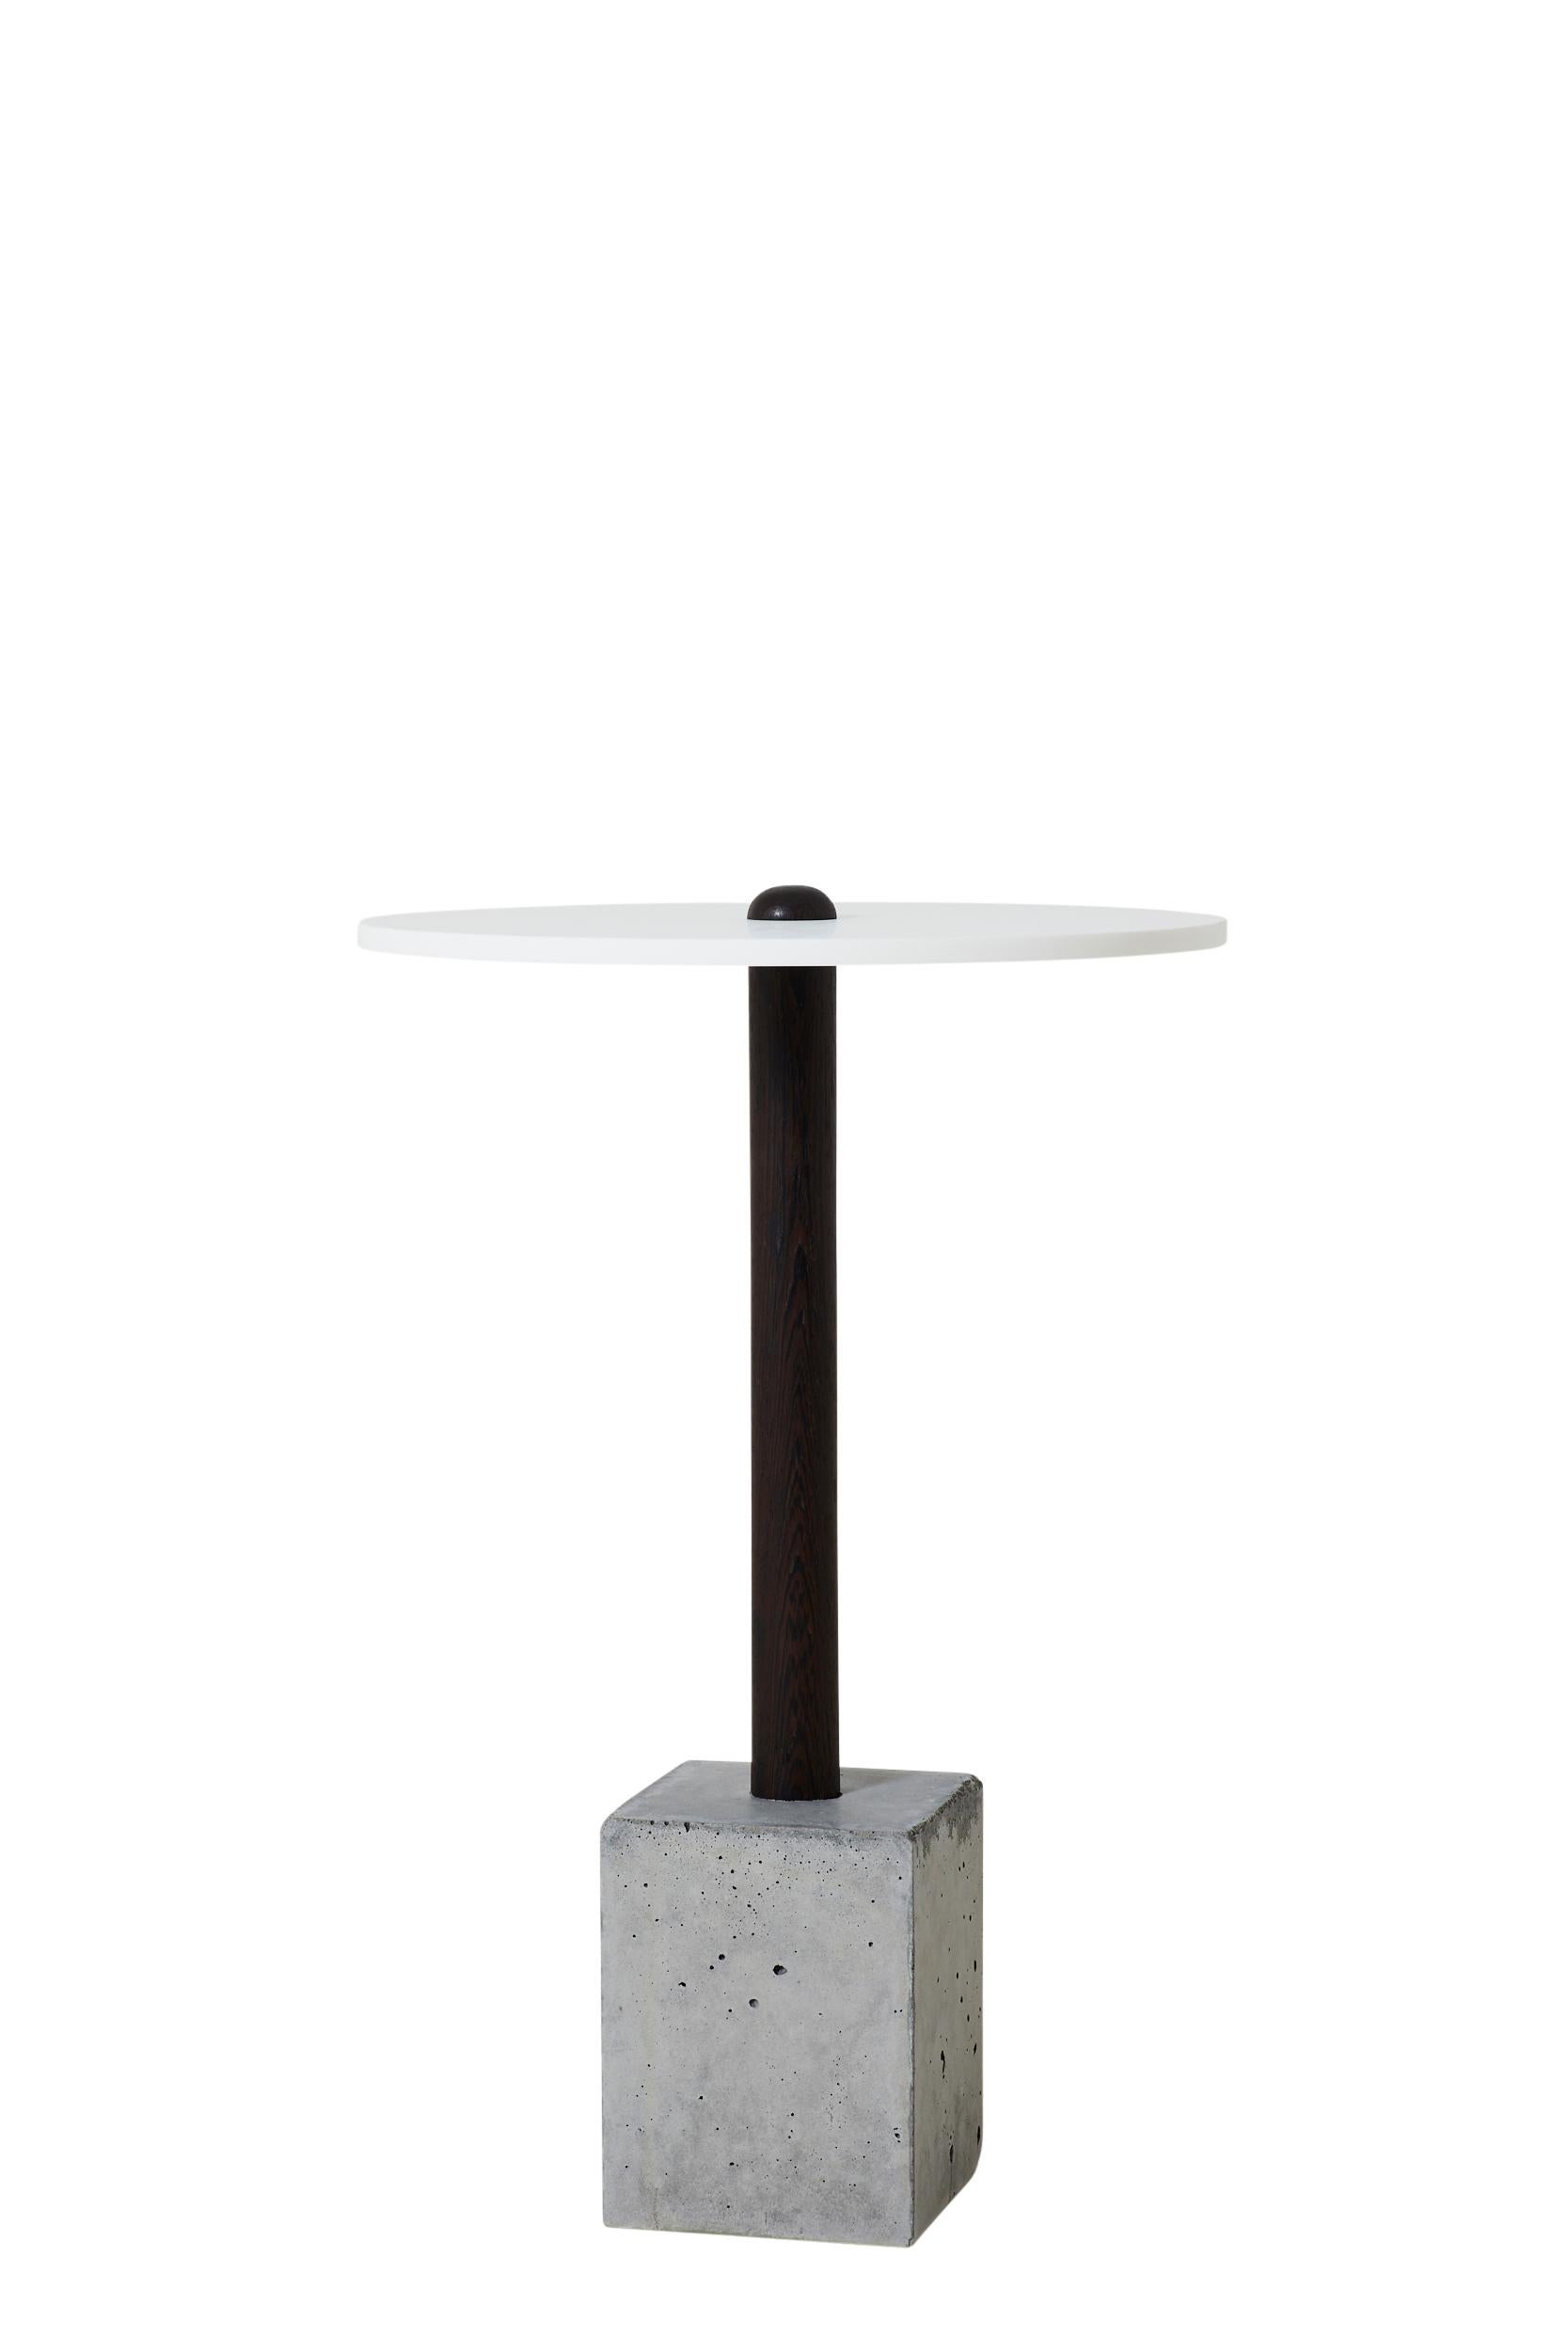 This simple and elegant design is composed of a hand-turned upright piece of wood that is cast into a concrete base. Shown in wenge, the concrete base is either a clean cube or a rougher 